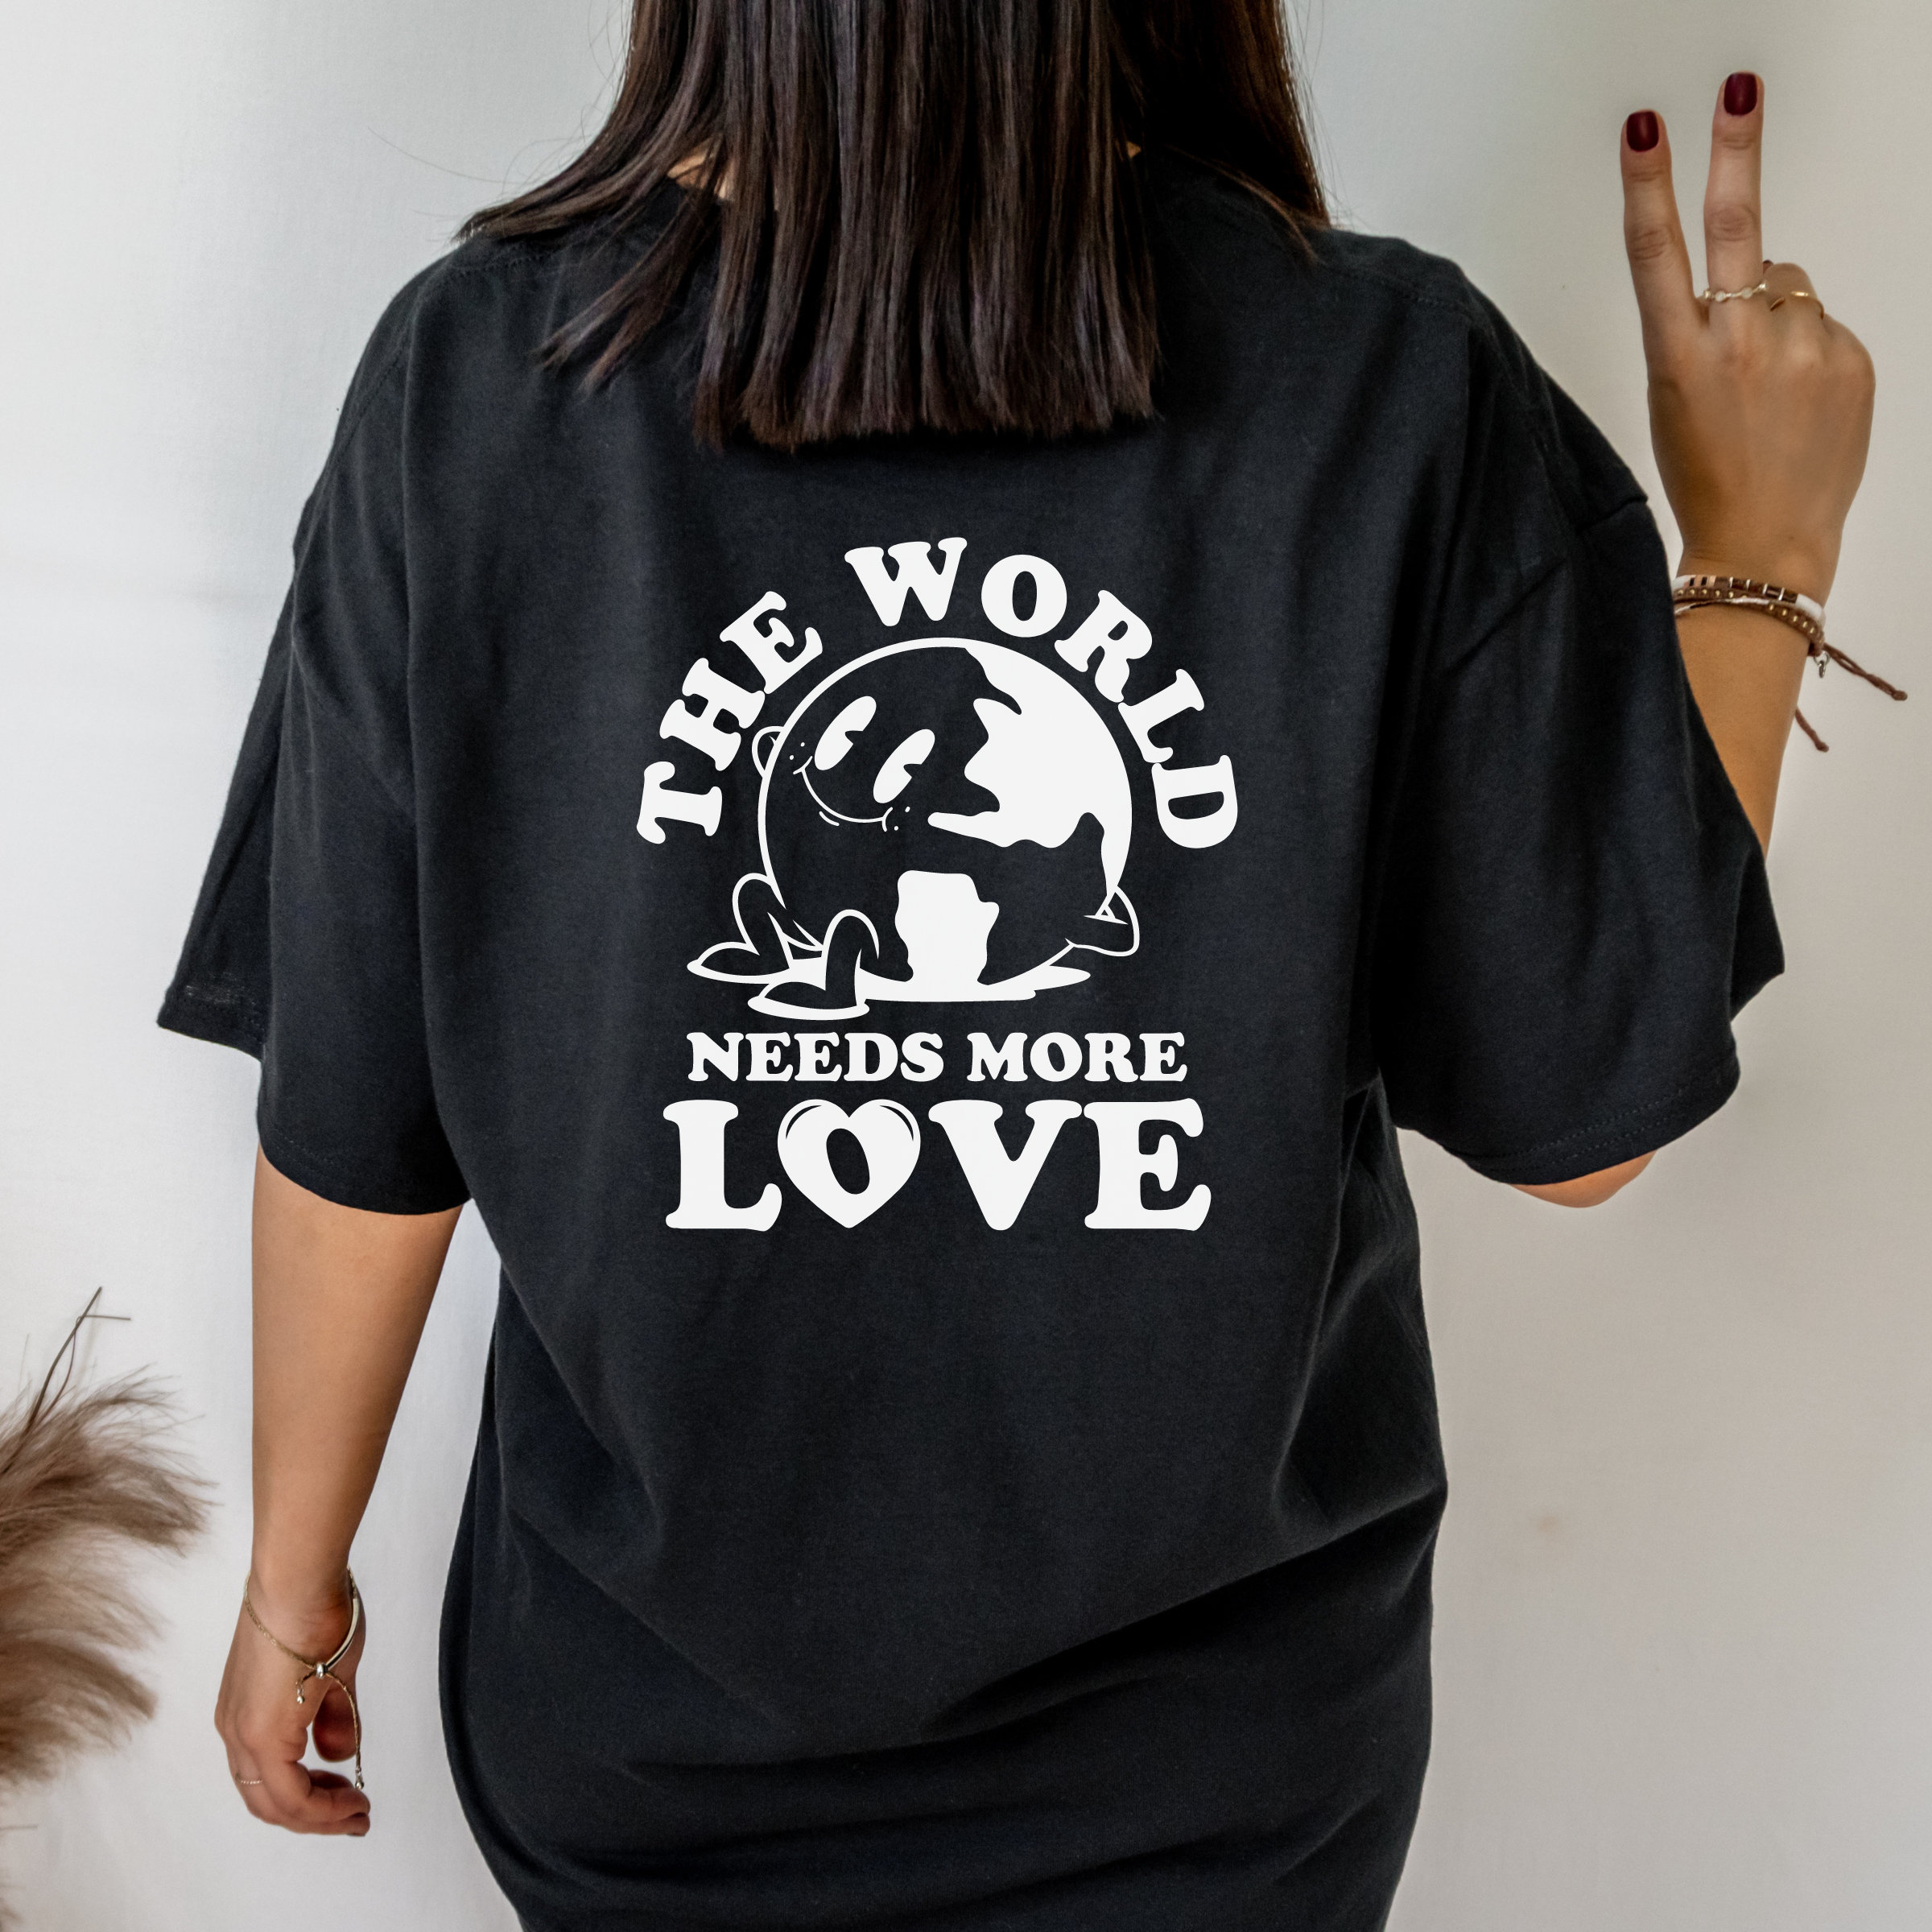 UltimateStyleSupply The World Needs More Love Tee, Trendy Summer Shirts for Women, Gift for Bestfriend Birthday, Graphic Tees Aesthetic, Trendy Graphic